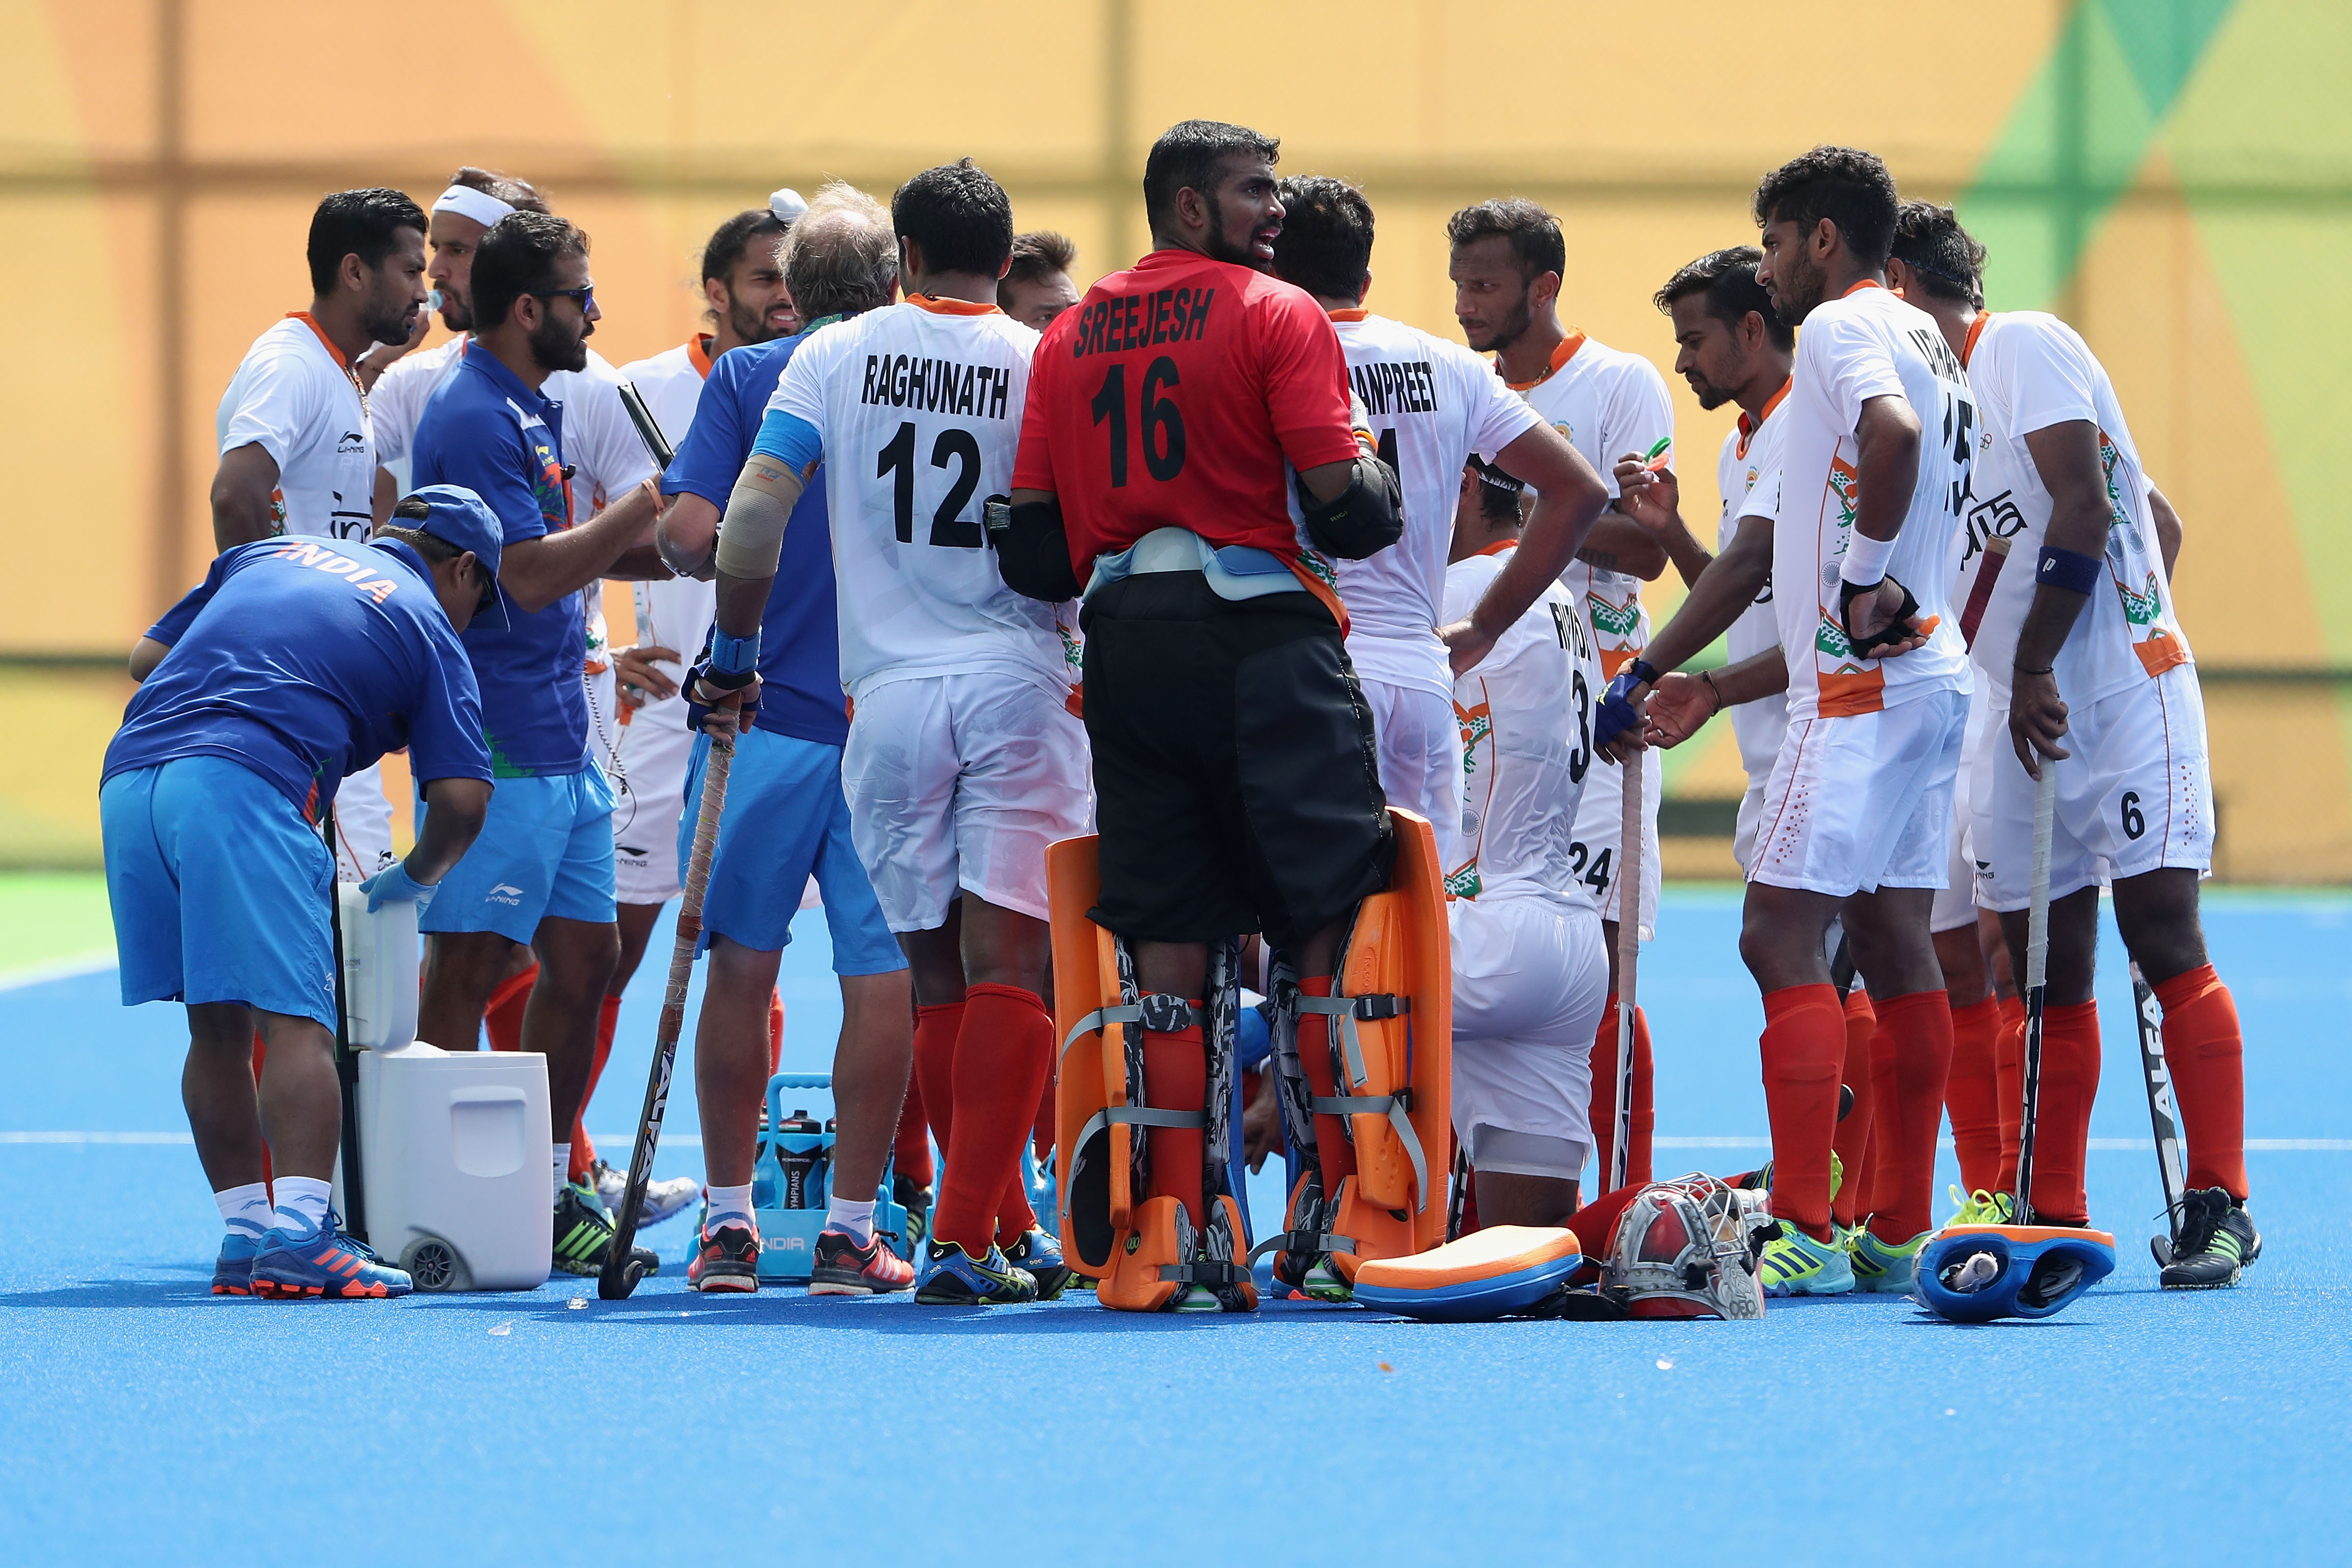 RIO DE JANEIRO, BRAZIL - AUGUST 09: India huddles up during a break from the hockey game against Argentina on Day 4 of the Rio 2016 Olympic Games at the Olympic Hockey Centre on August 9, 2016 in Rio de Janeiro, Brazil. (Photo by Christian Petersen/Getty Images)